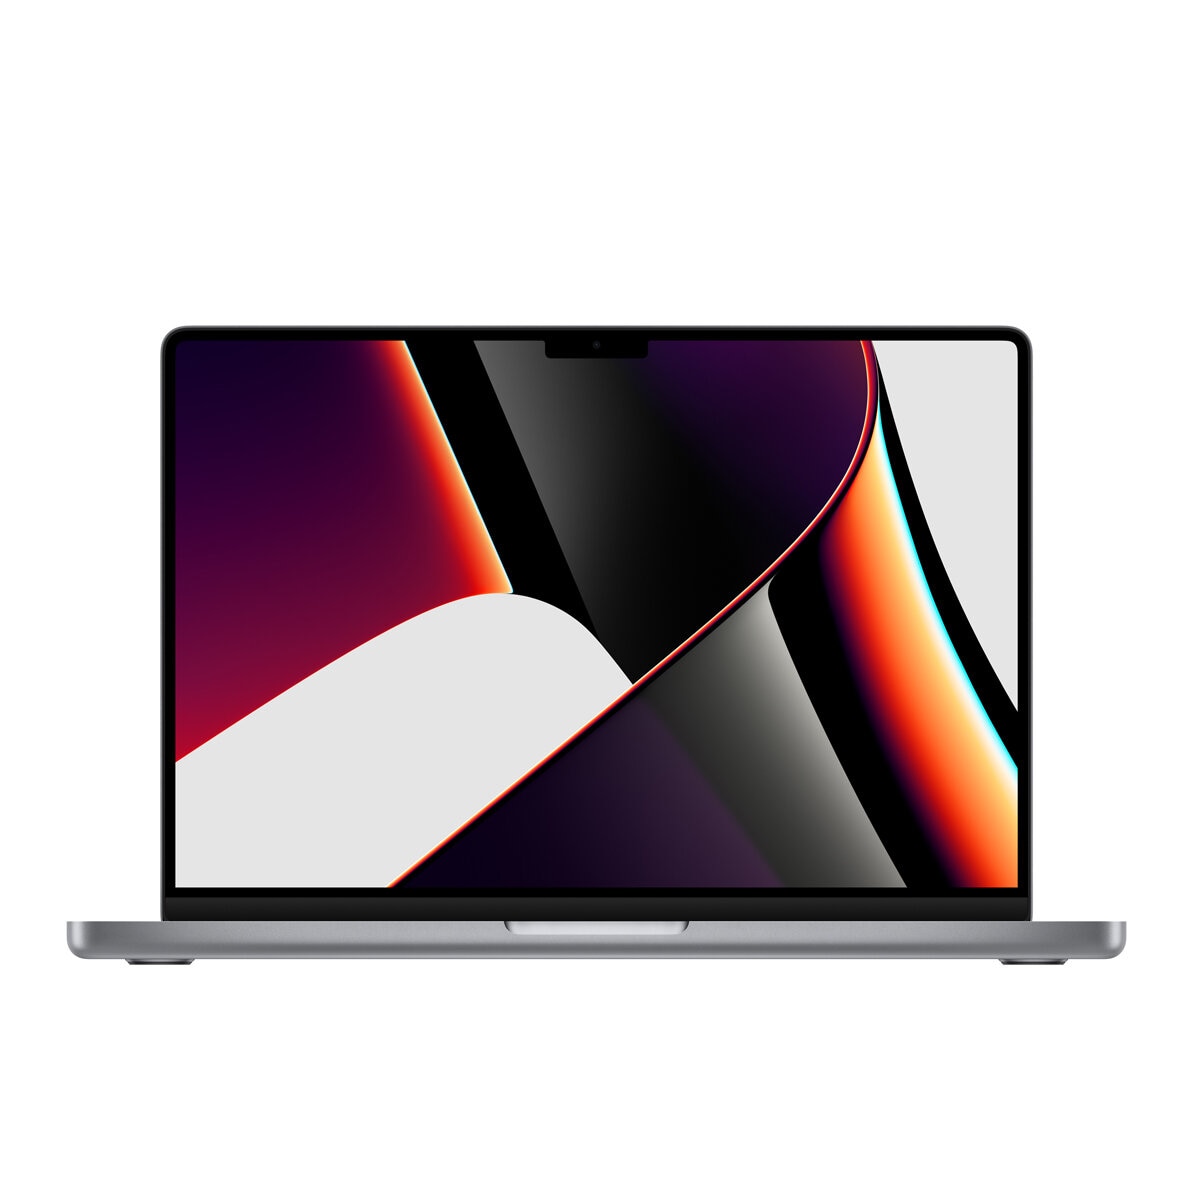 MacBook Pro 14 Inch with M1 Pro Chip